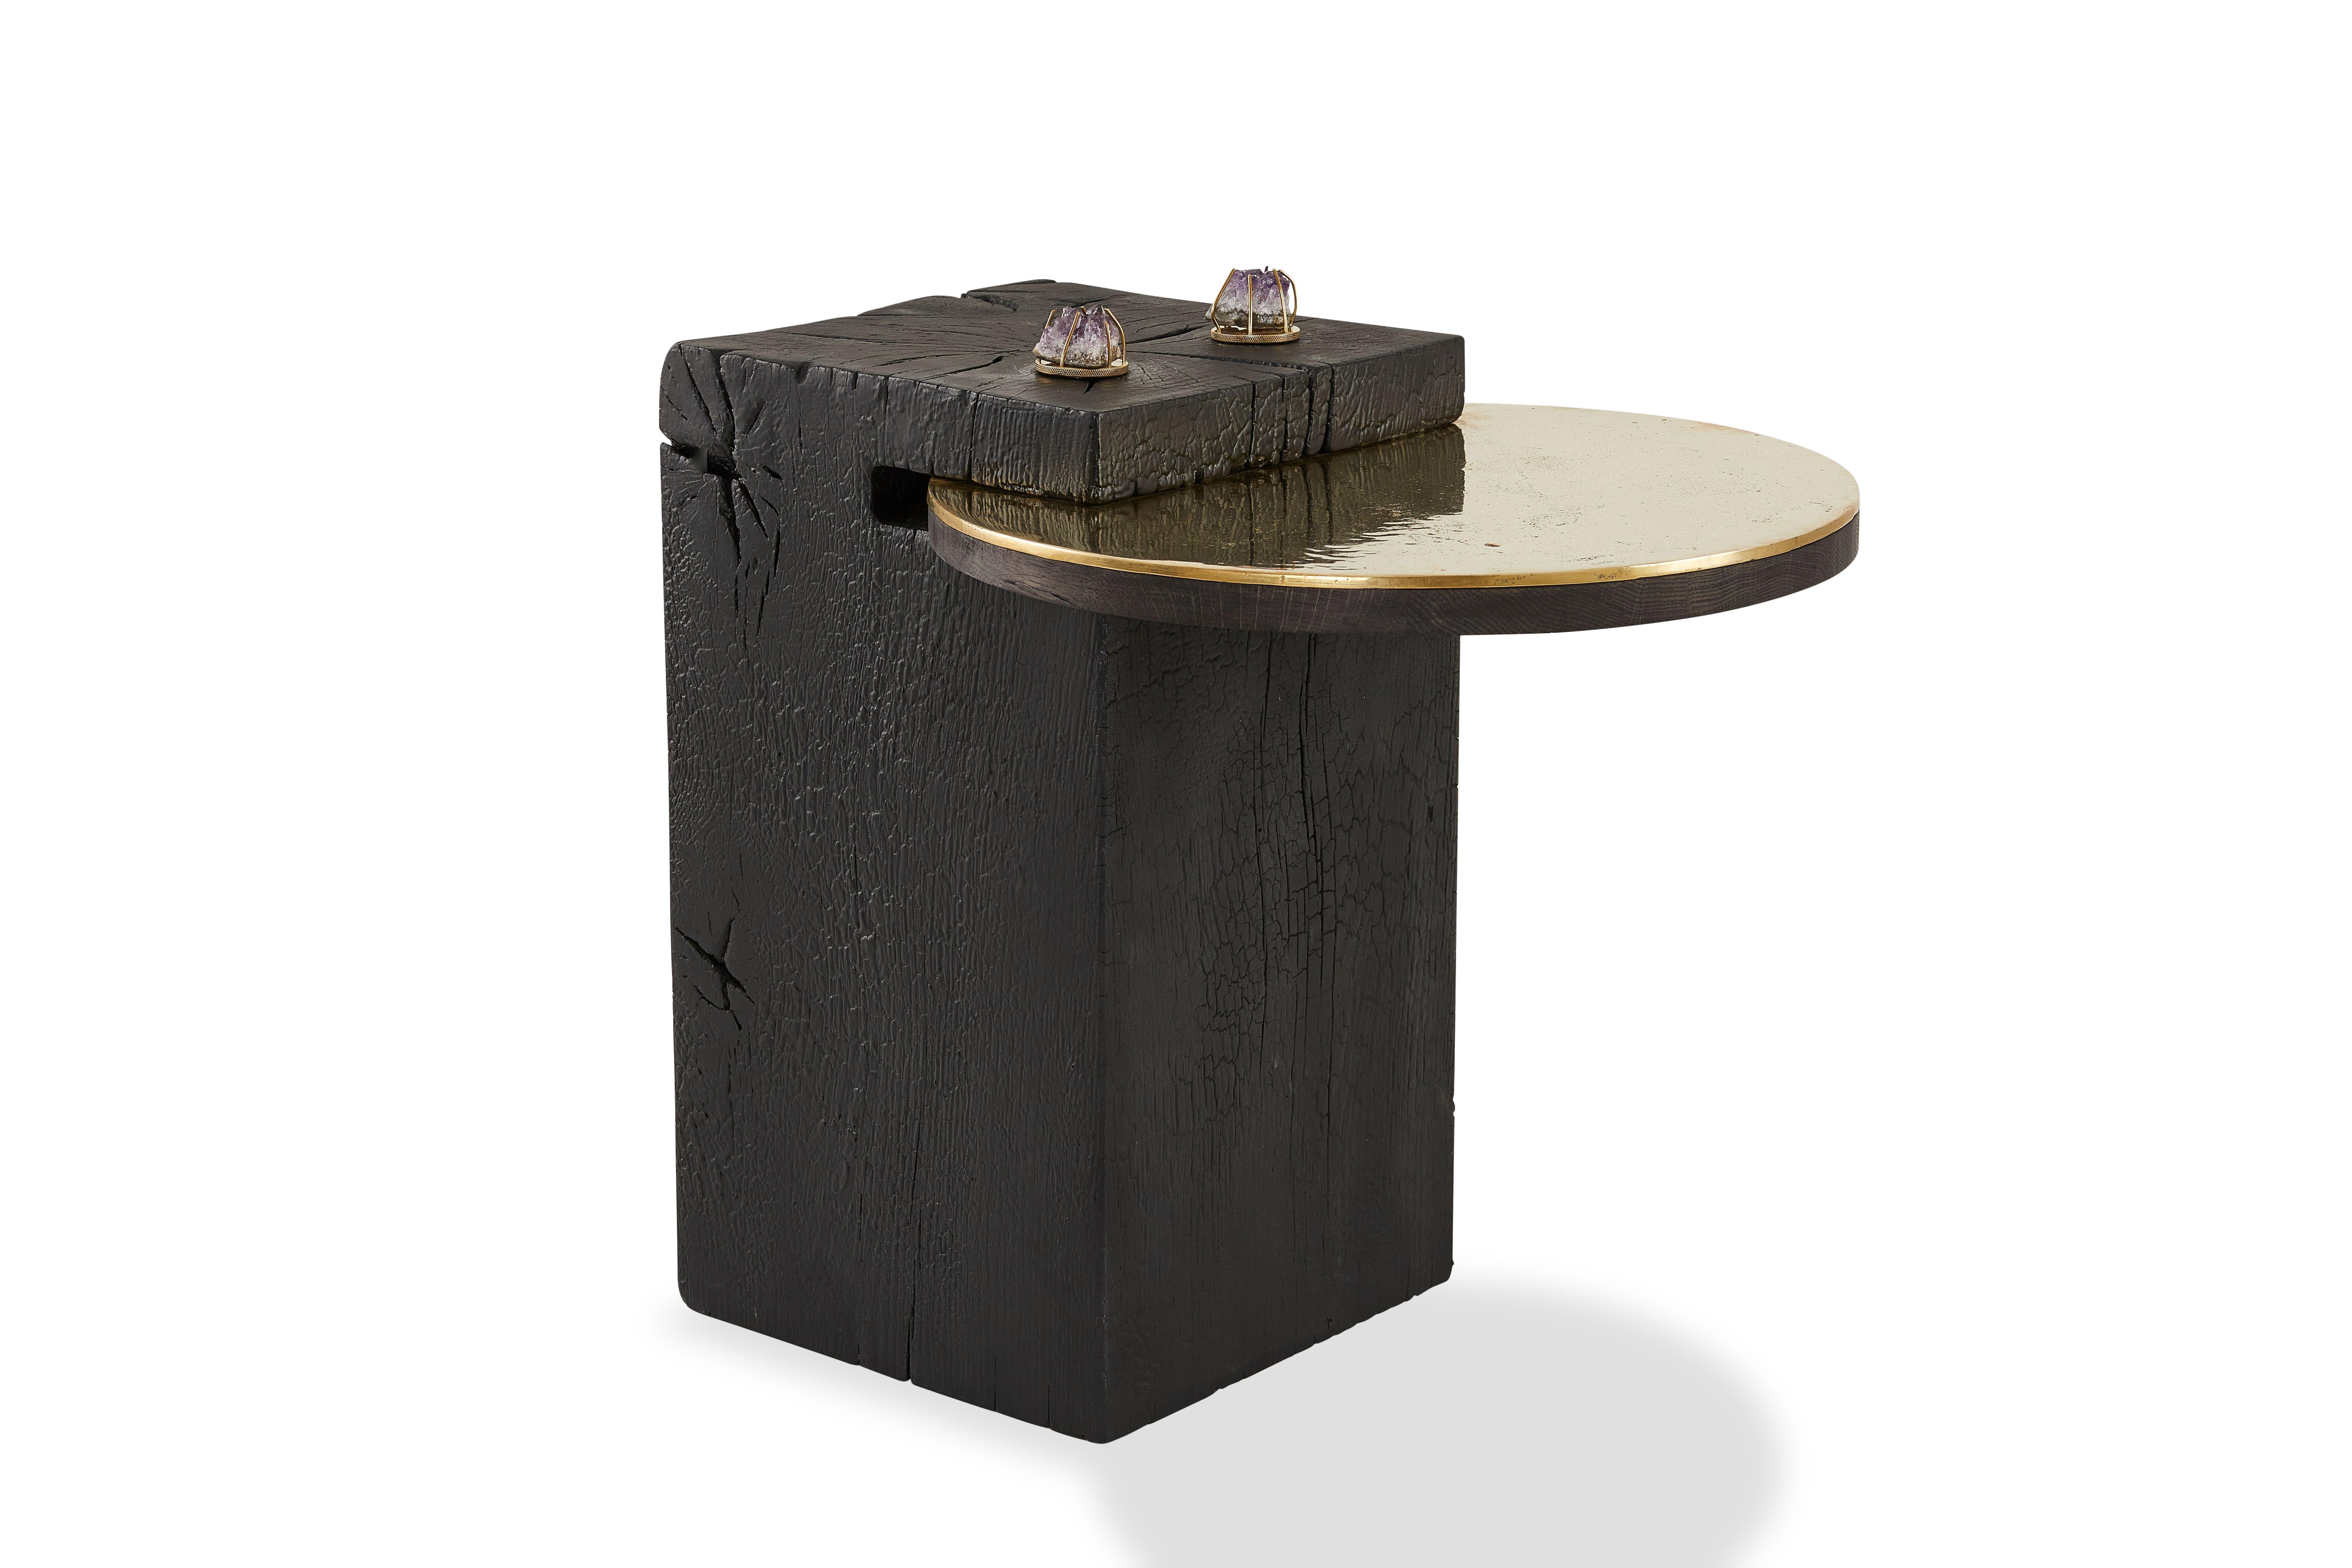 Sherpa side table by Egg Designs
Dimensions: 49 L x 64 D x 63 H cm 
Materials: Shou Sugi Ban hardwood timber, solid cast polished brass, brass, amethyst crystal

Founded by South Africans and life partners, Greg and Roche Dry - Egg is a unique